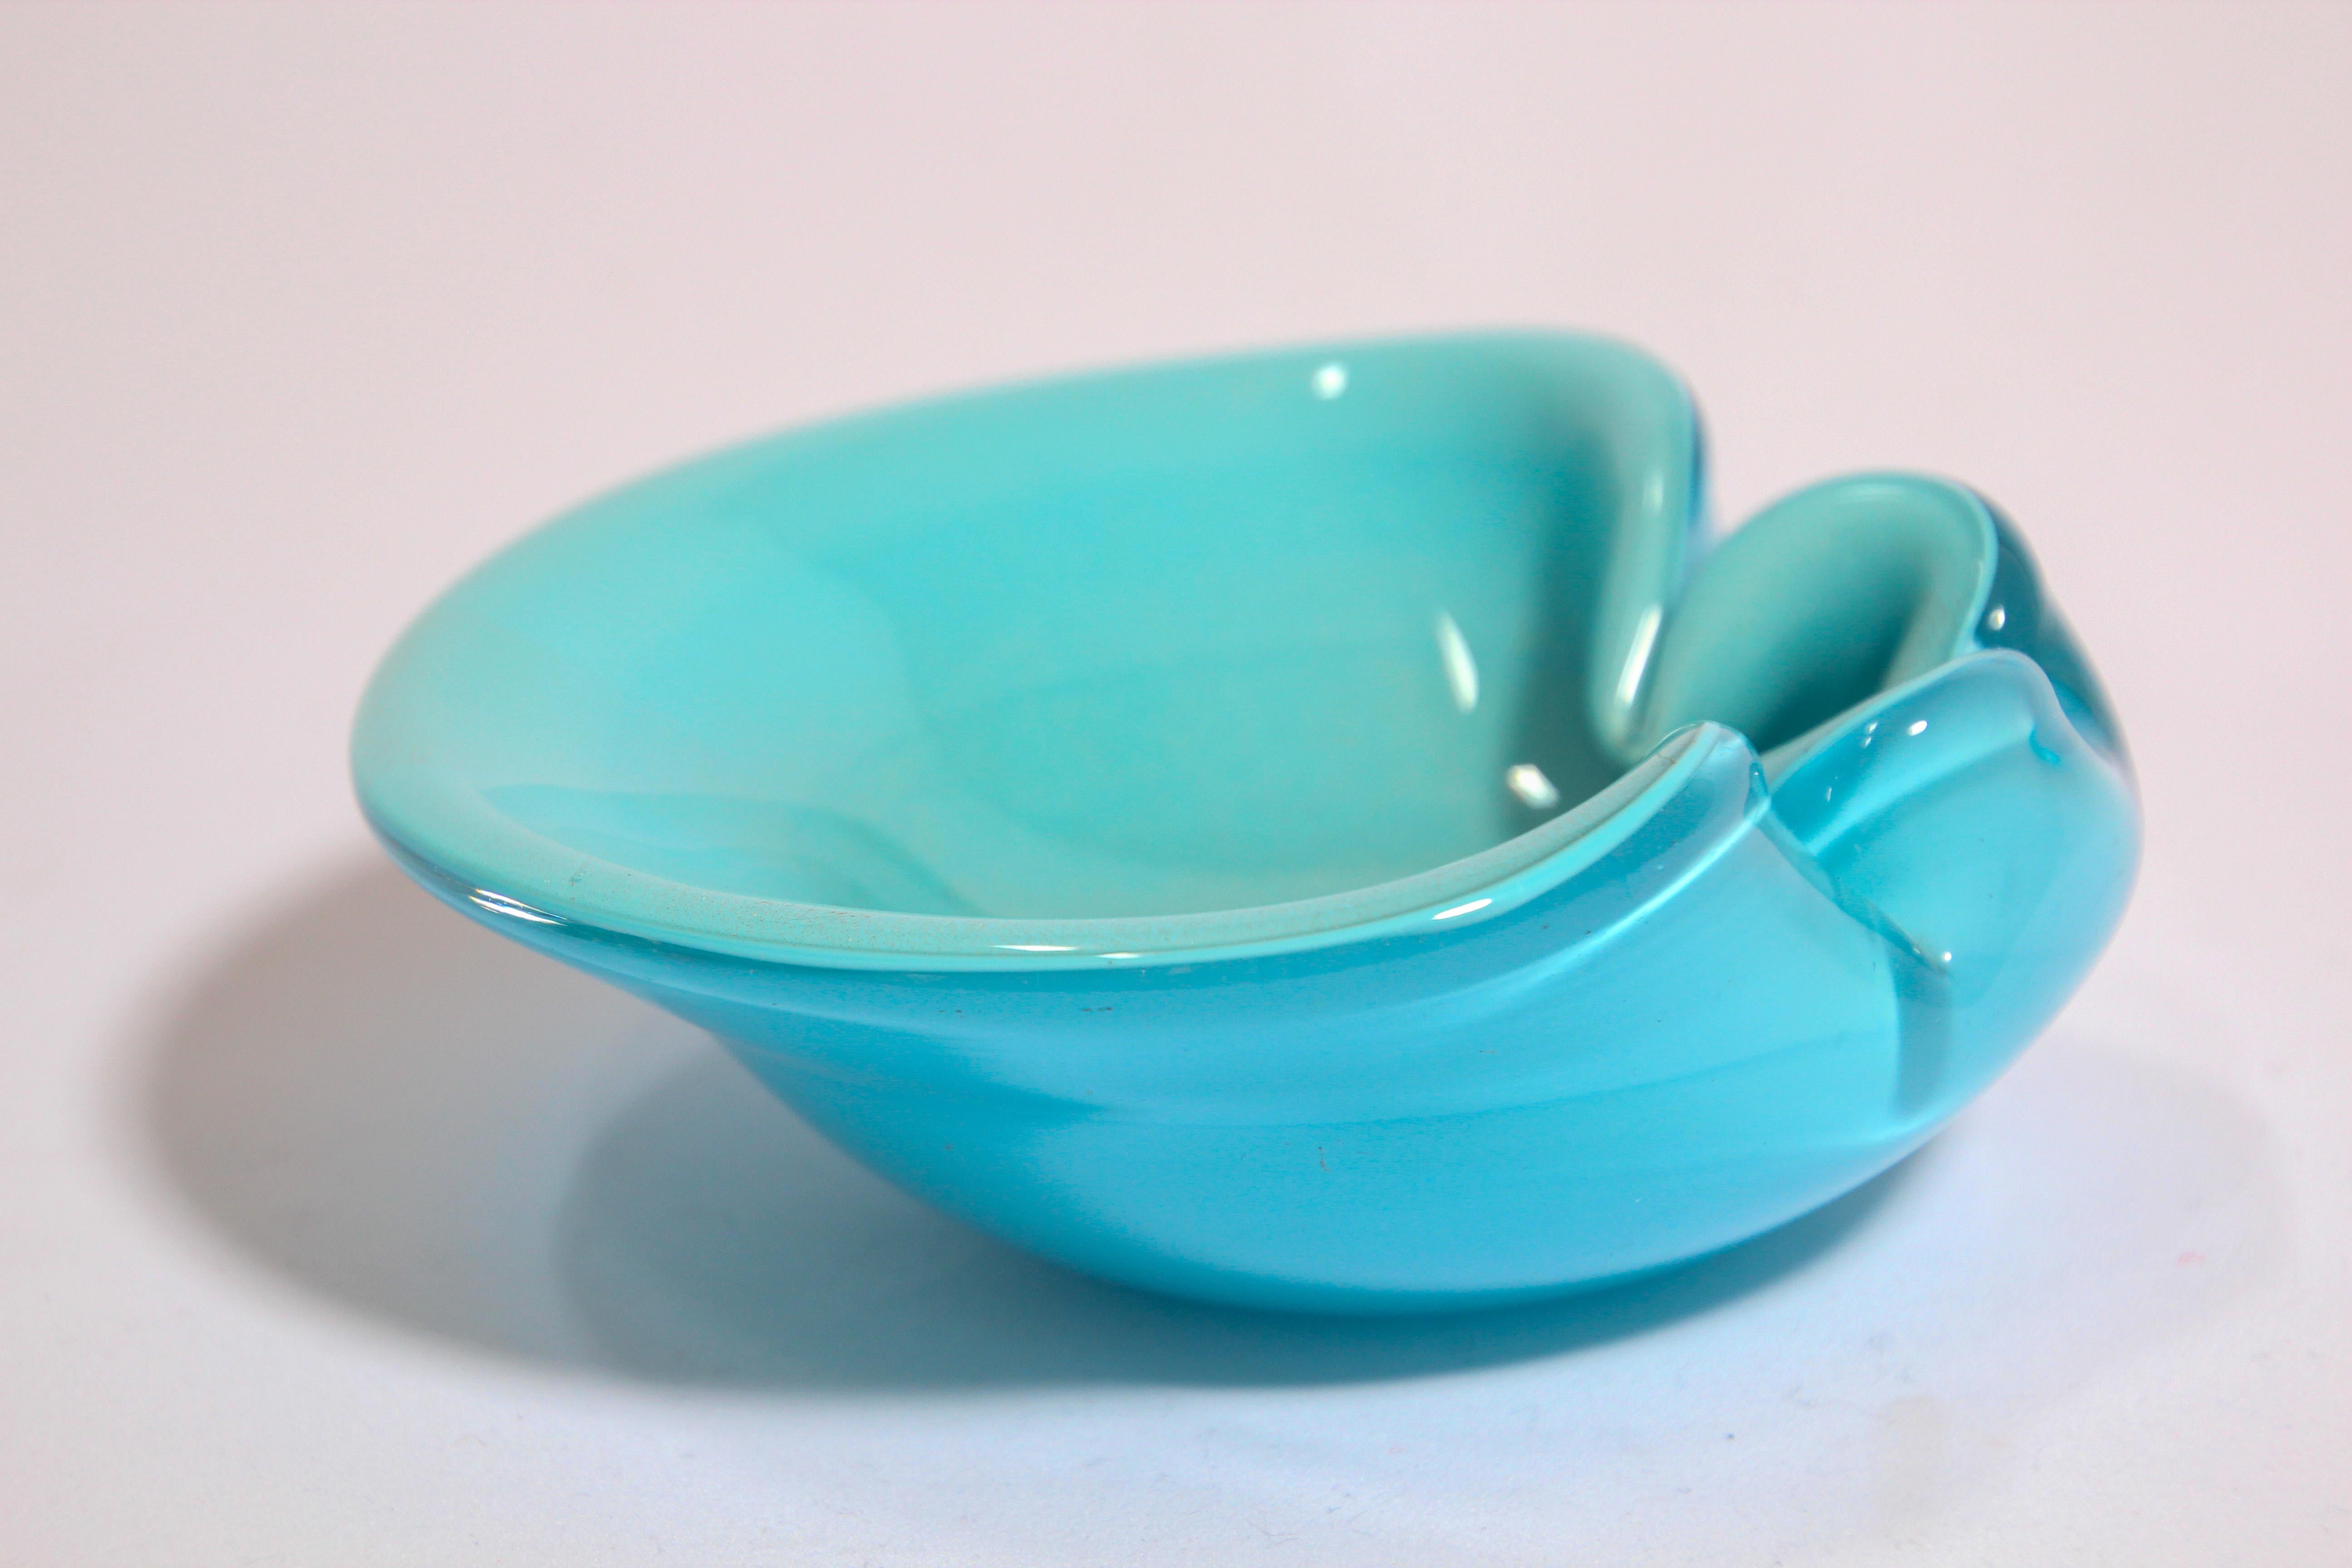 Gorgeous mid 20th-century Italian Murano Venetian handblown light blue art glass flower shaped bowl or ashtray. 
Sculptural organic open flower form in turquoise and beautiful gold flecks decoration in aventurine technique.
The catchall bowl has